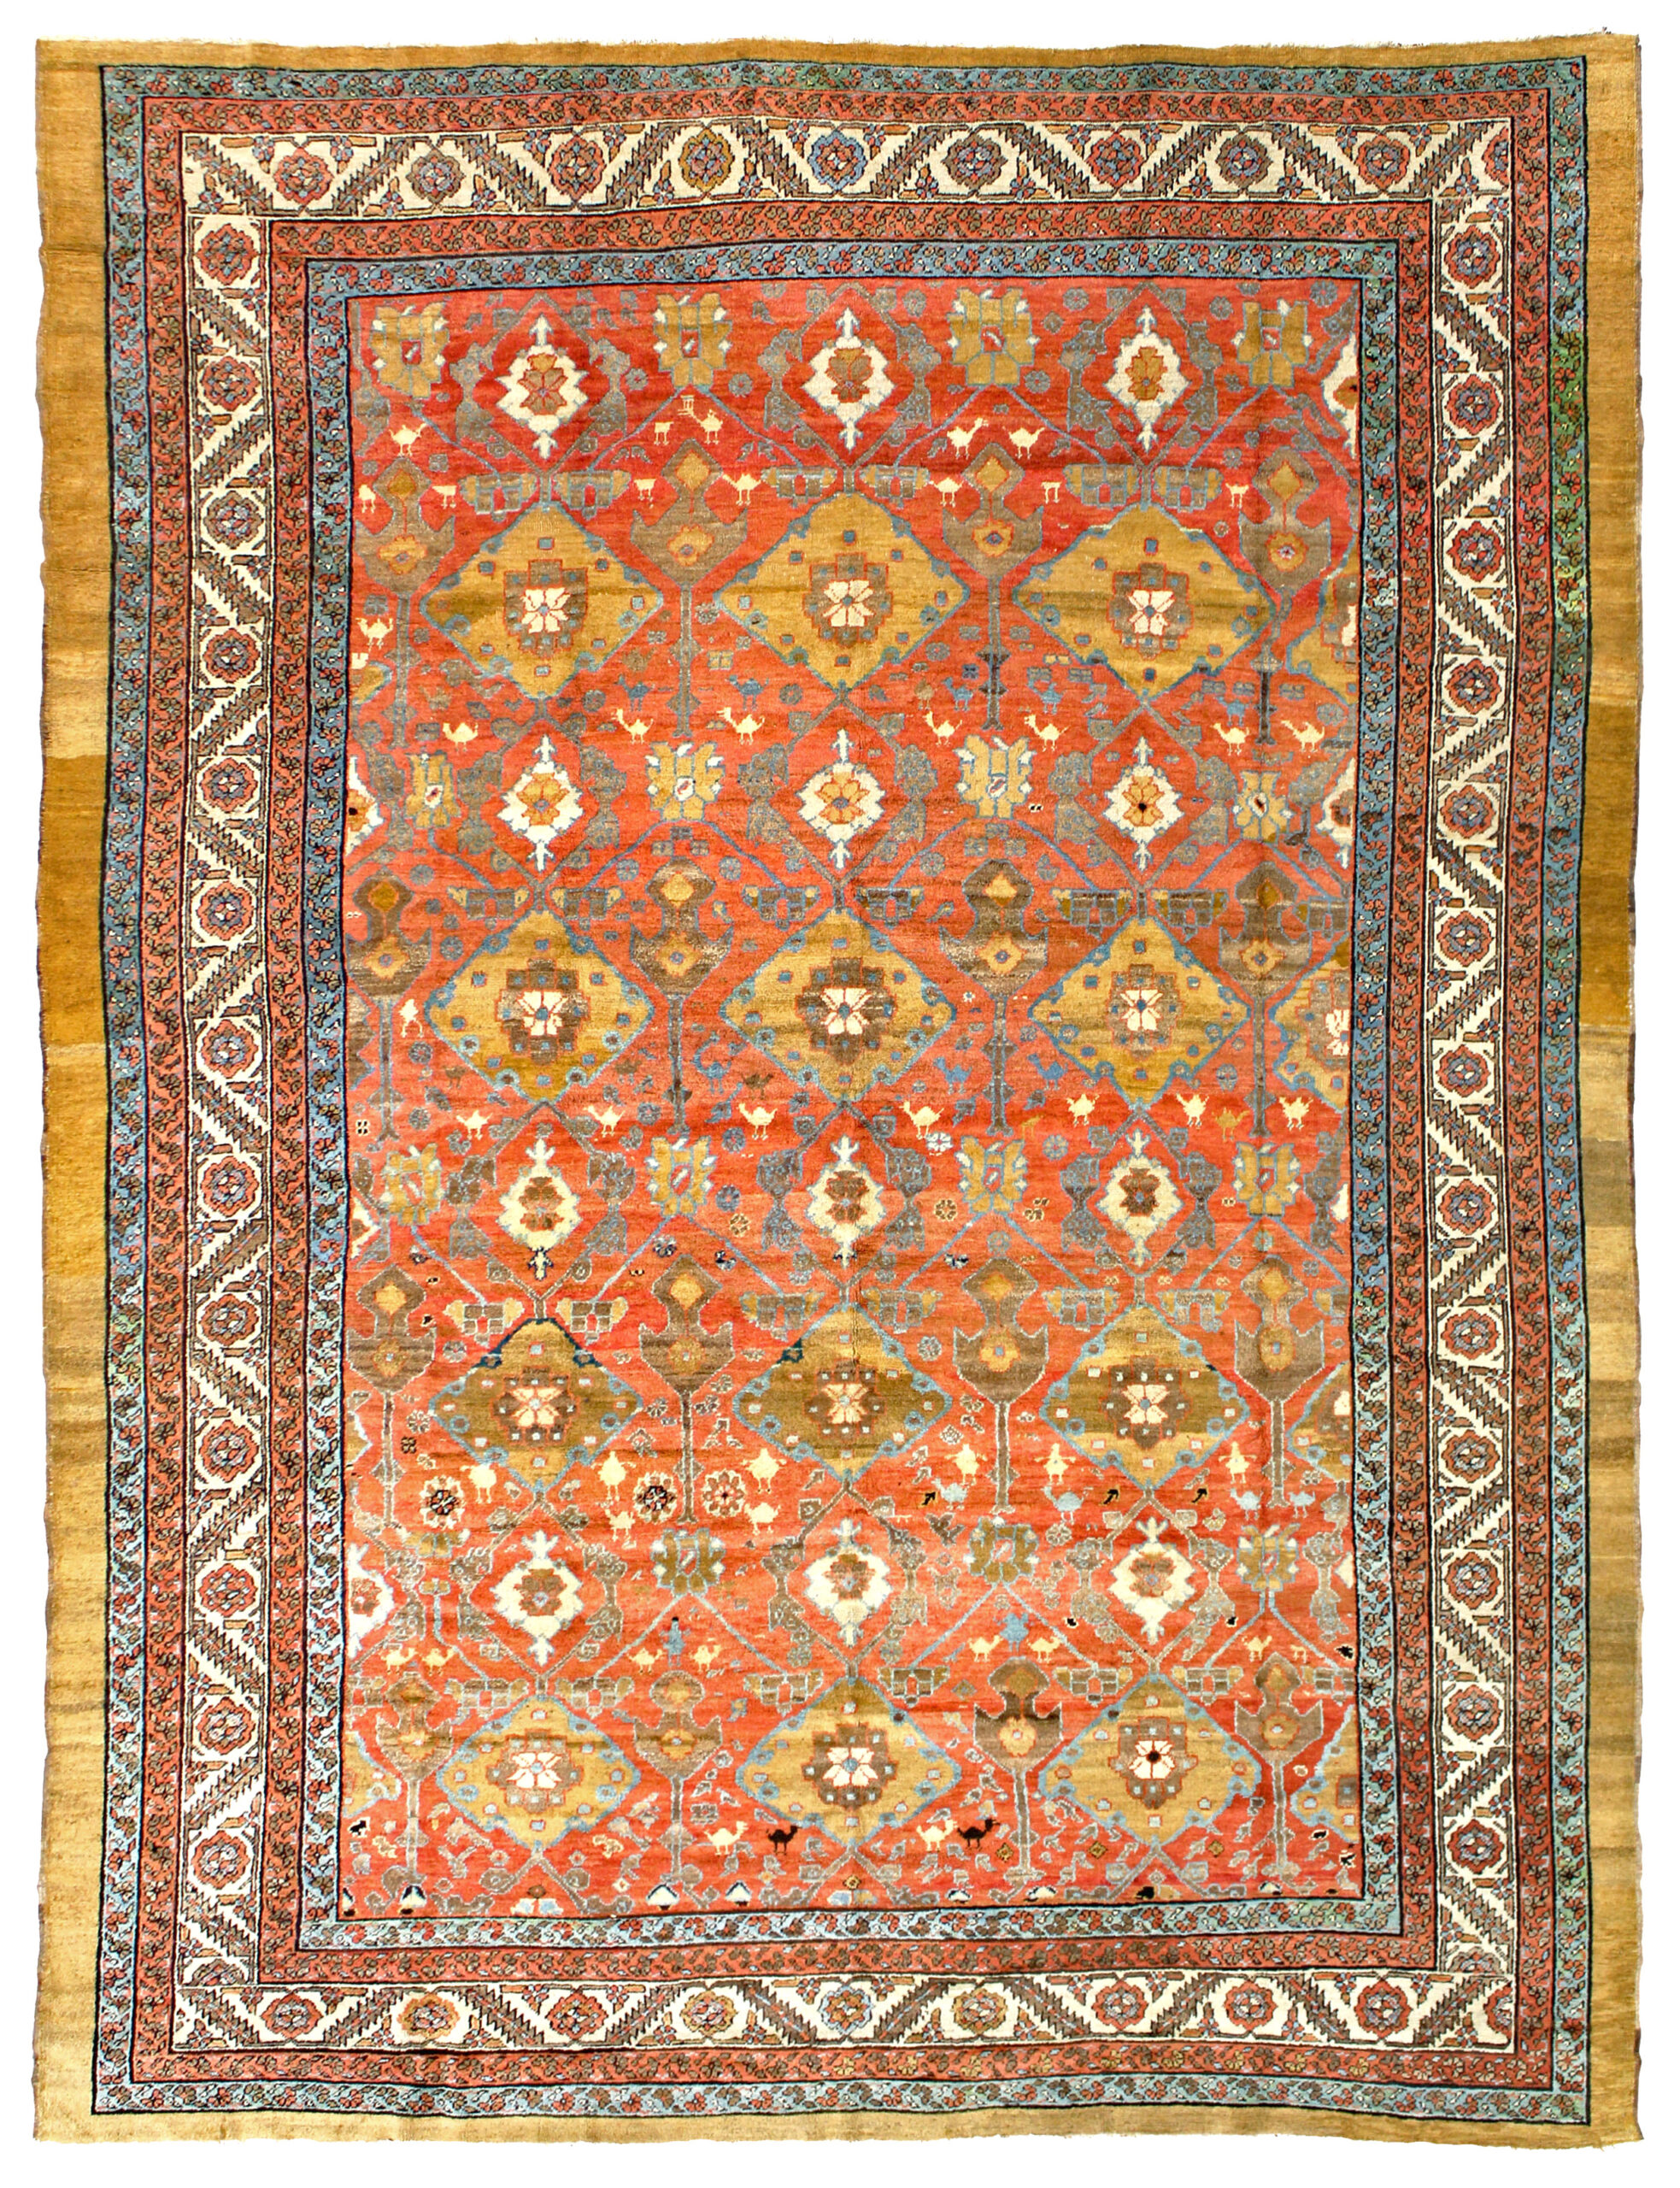 A highly important 19th century Persian Bakshaish carpet from the Heriz area in northwest Persia. The salmon color field is decorated with camel color medallions and framed by an ivory border. Douglas Stock Gallery antique Oriental rugs Boston,MA area, South Natick